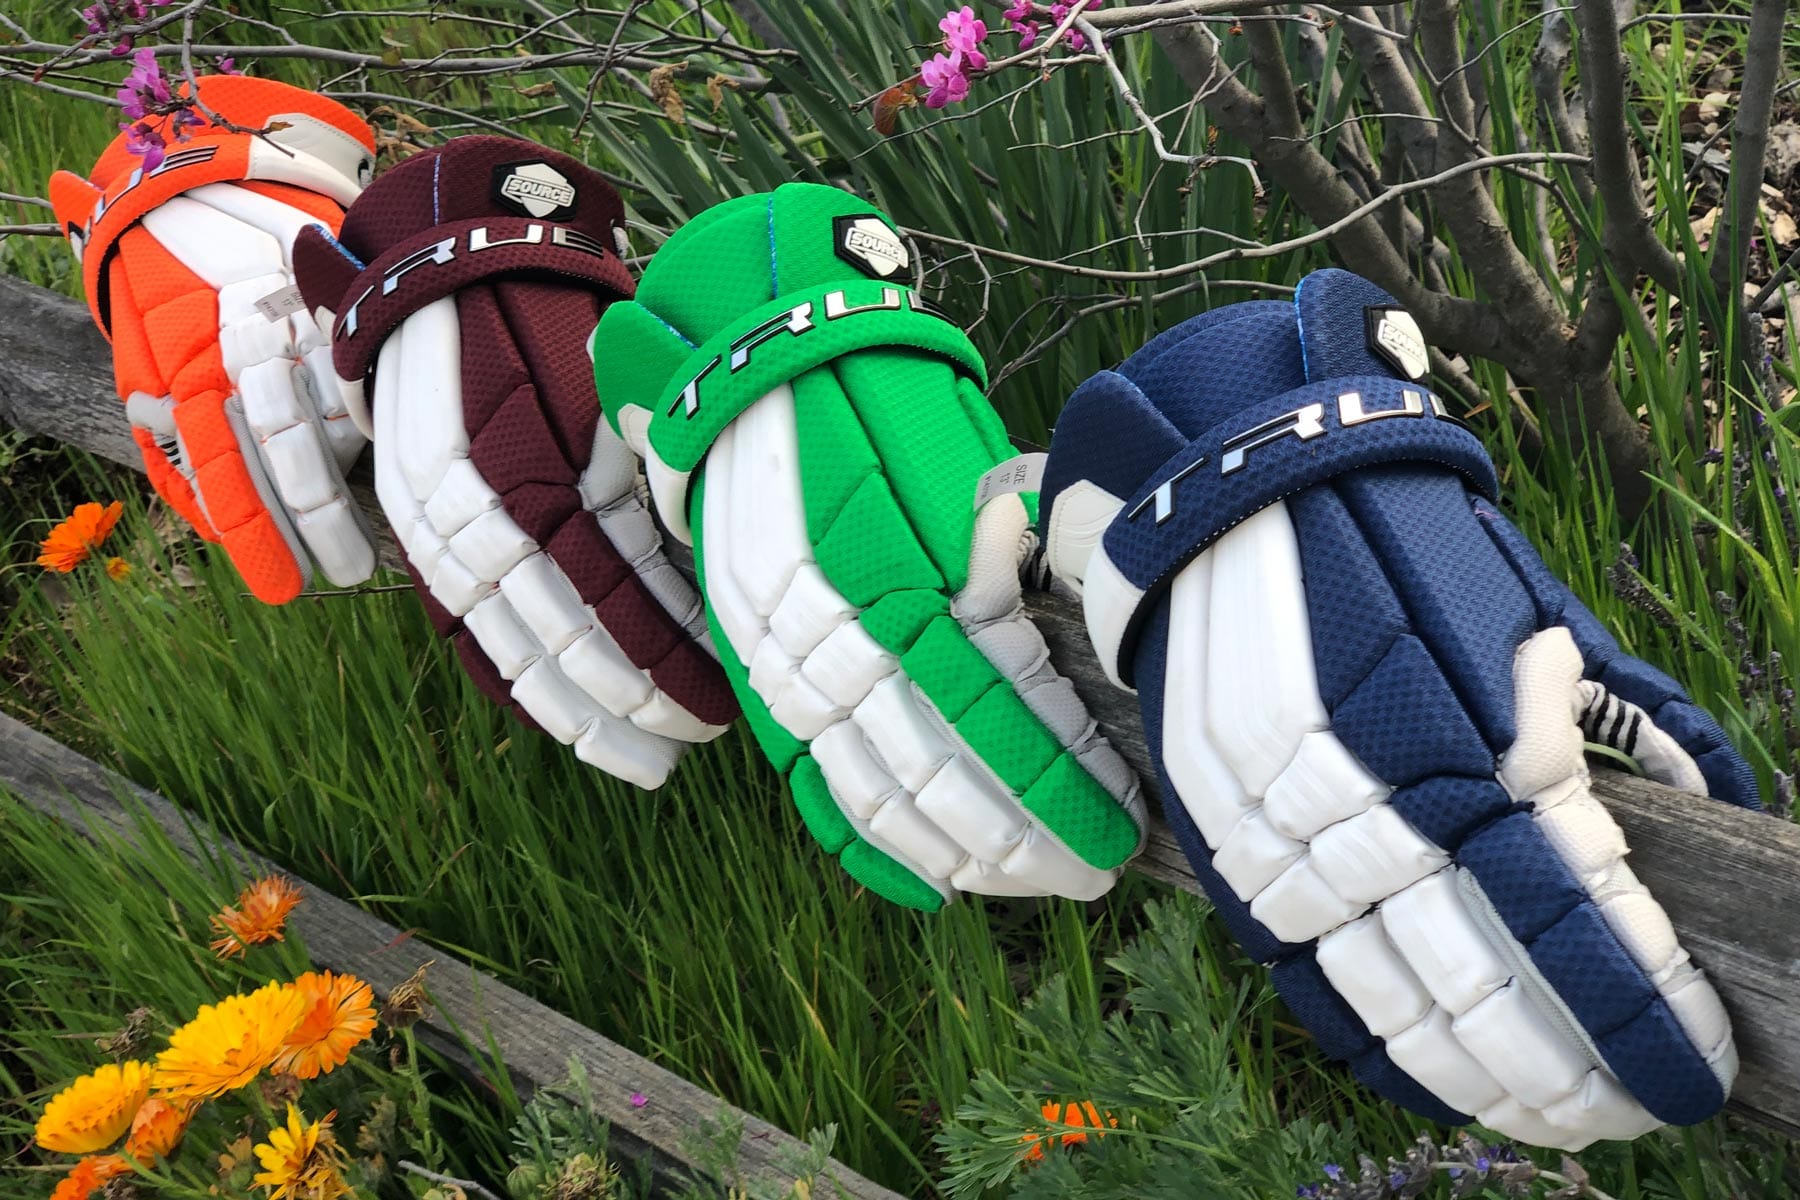 Custom gloves in your team colors from Lacrosse Fanatic